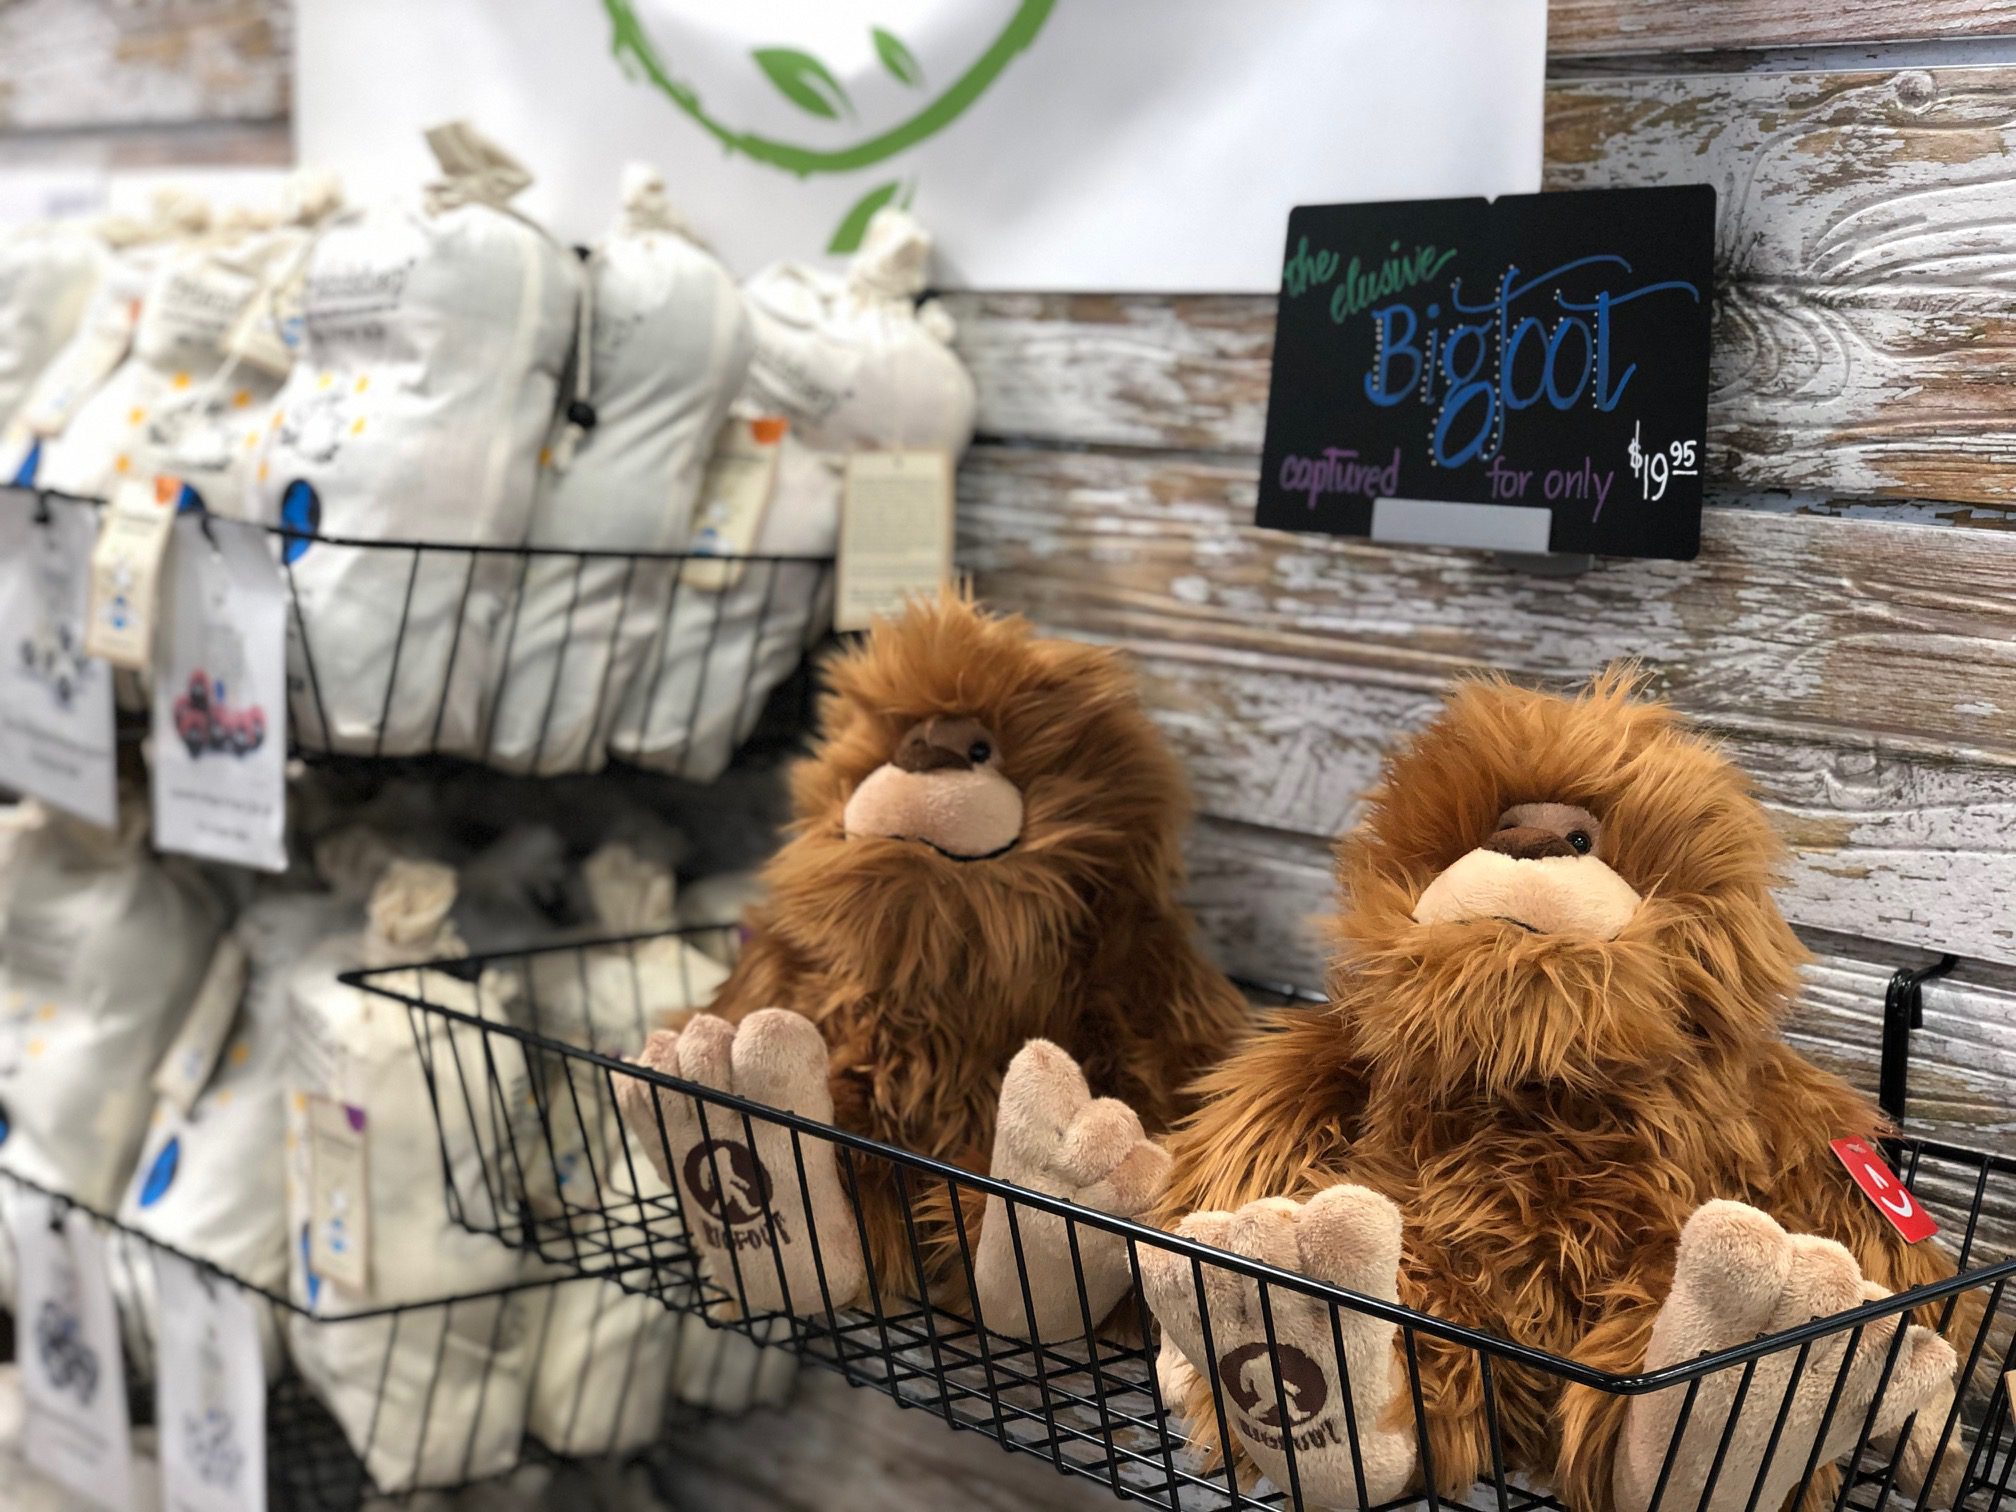 Two Bigfoot stuffed animals in a basket.